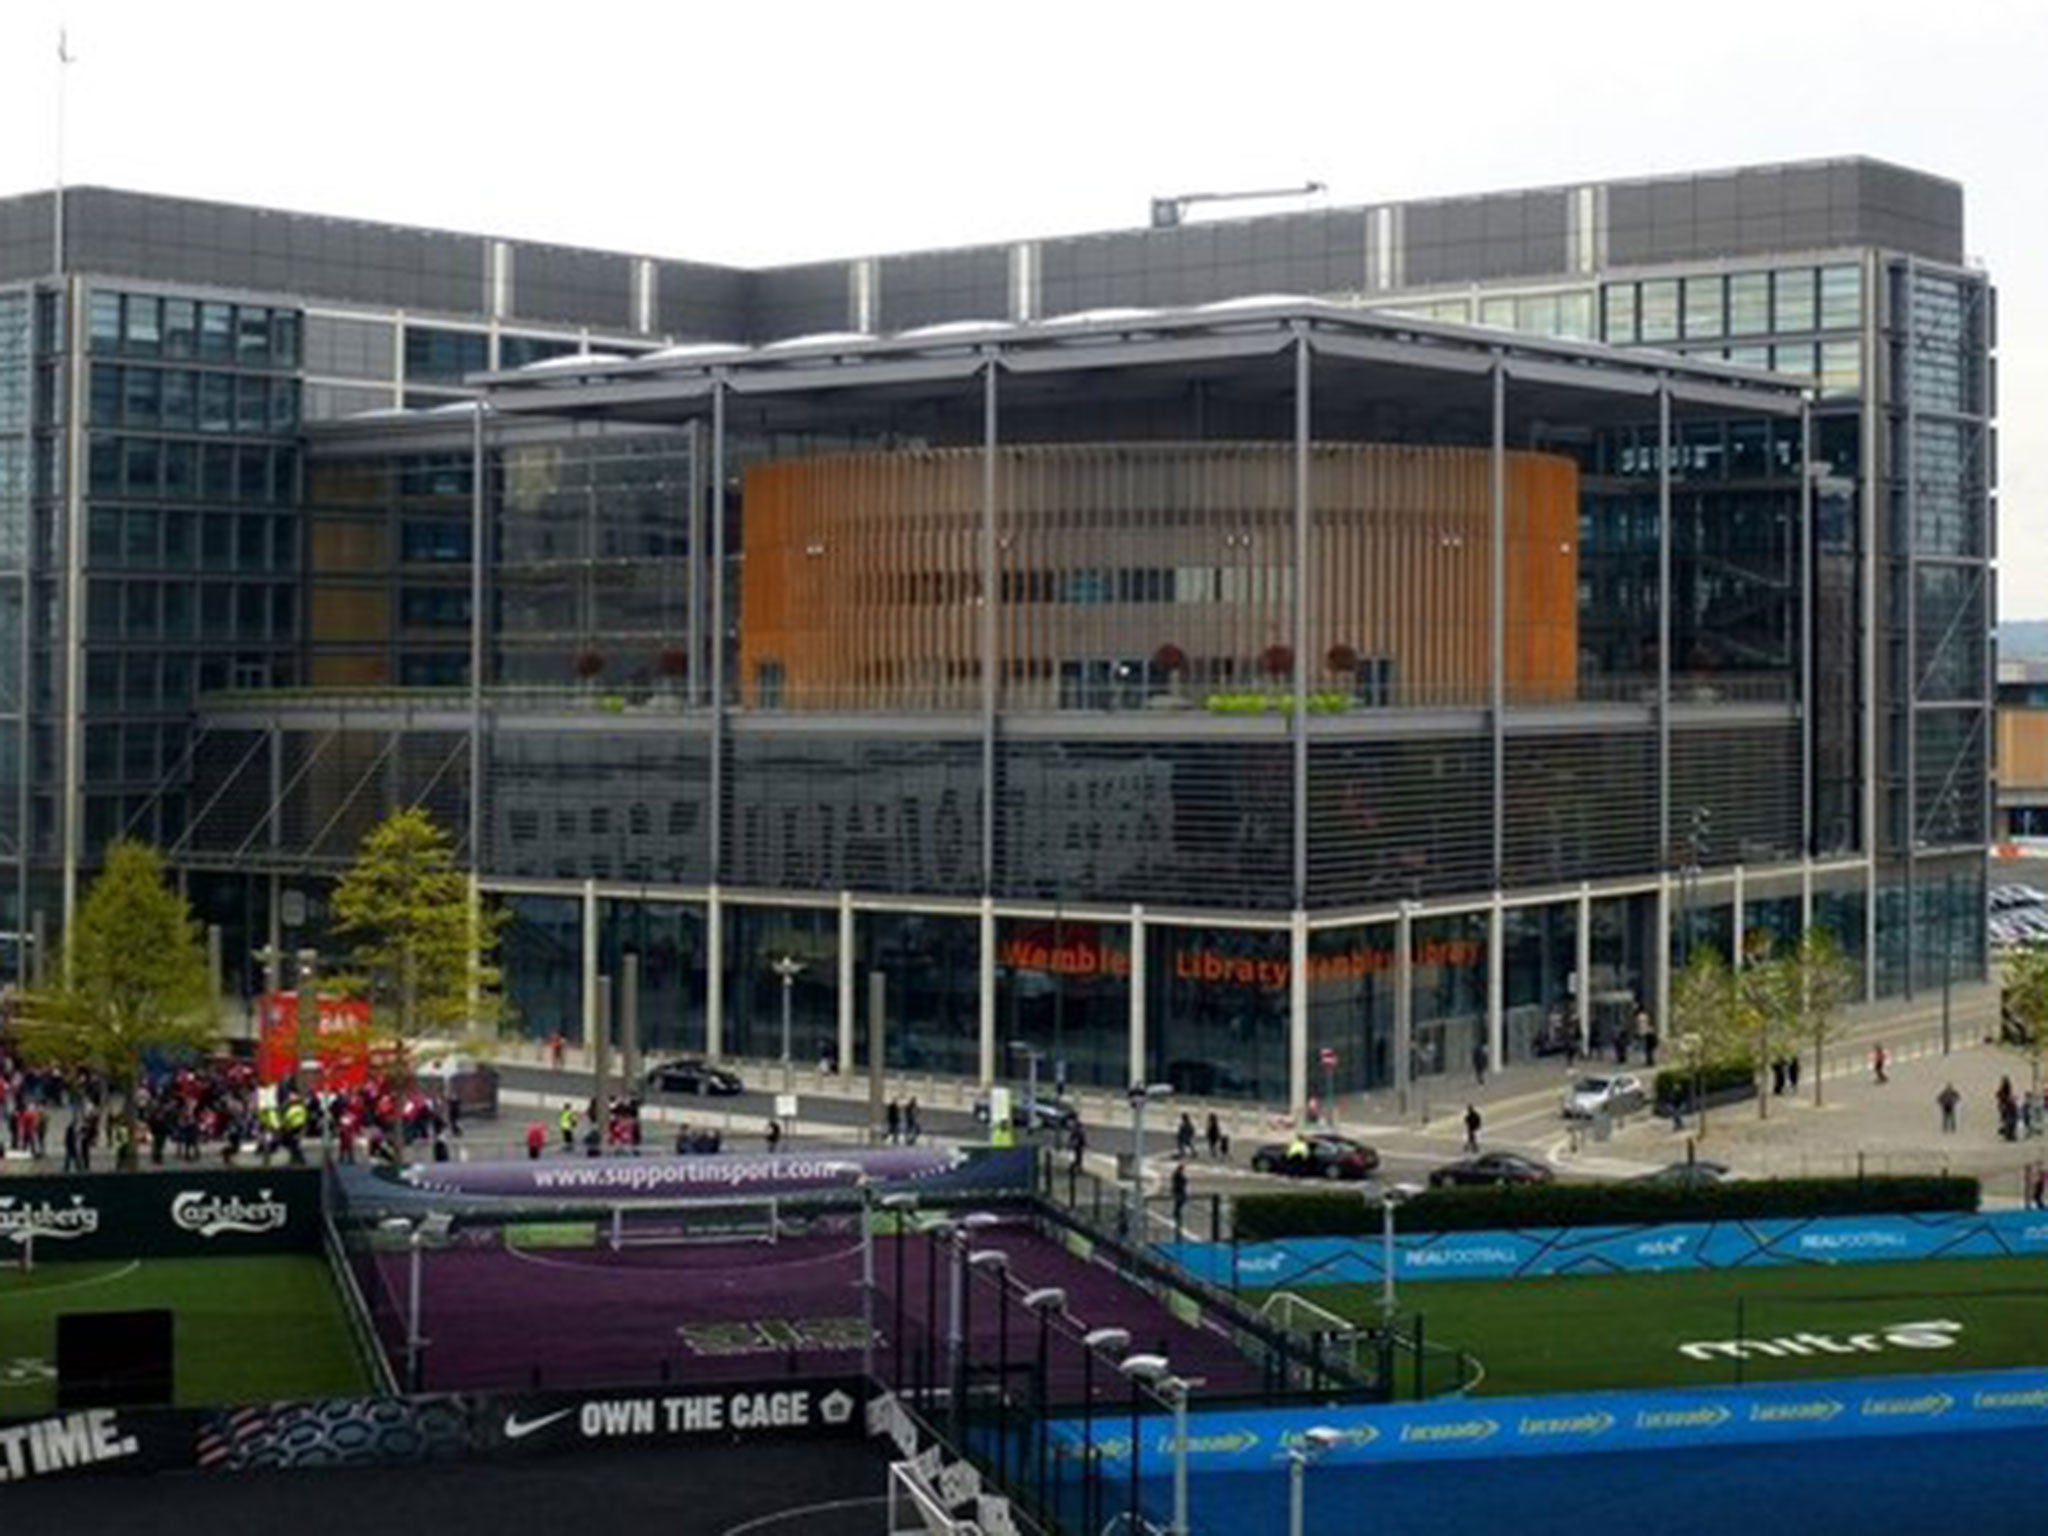 The civic centre in Wembley